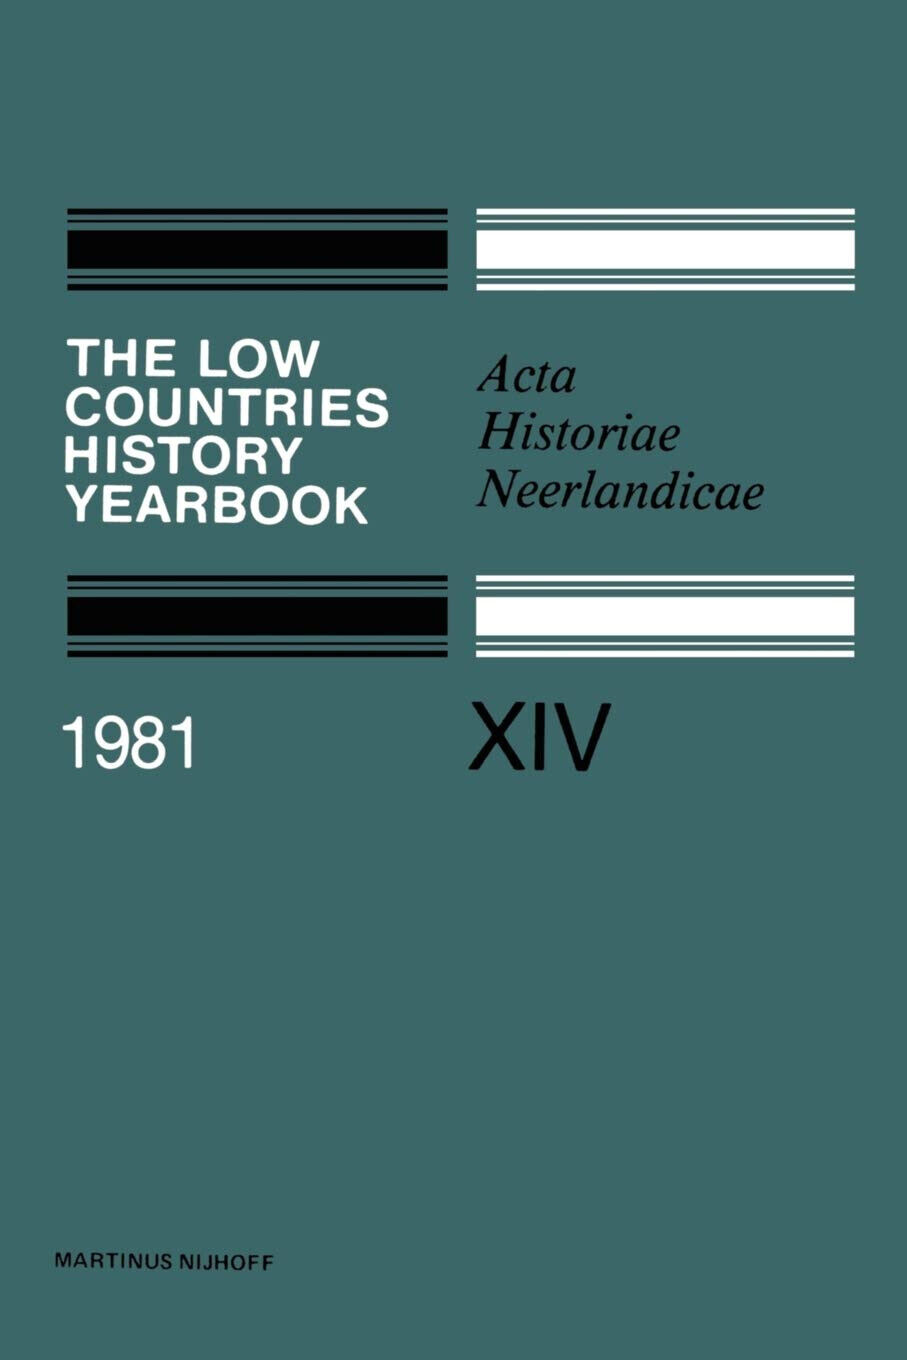 The Low Countries History Yearbook - I. Sch?ffer - Springer, 2012